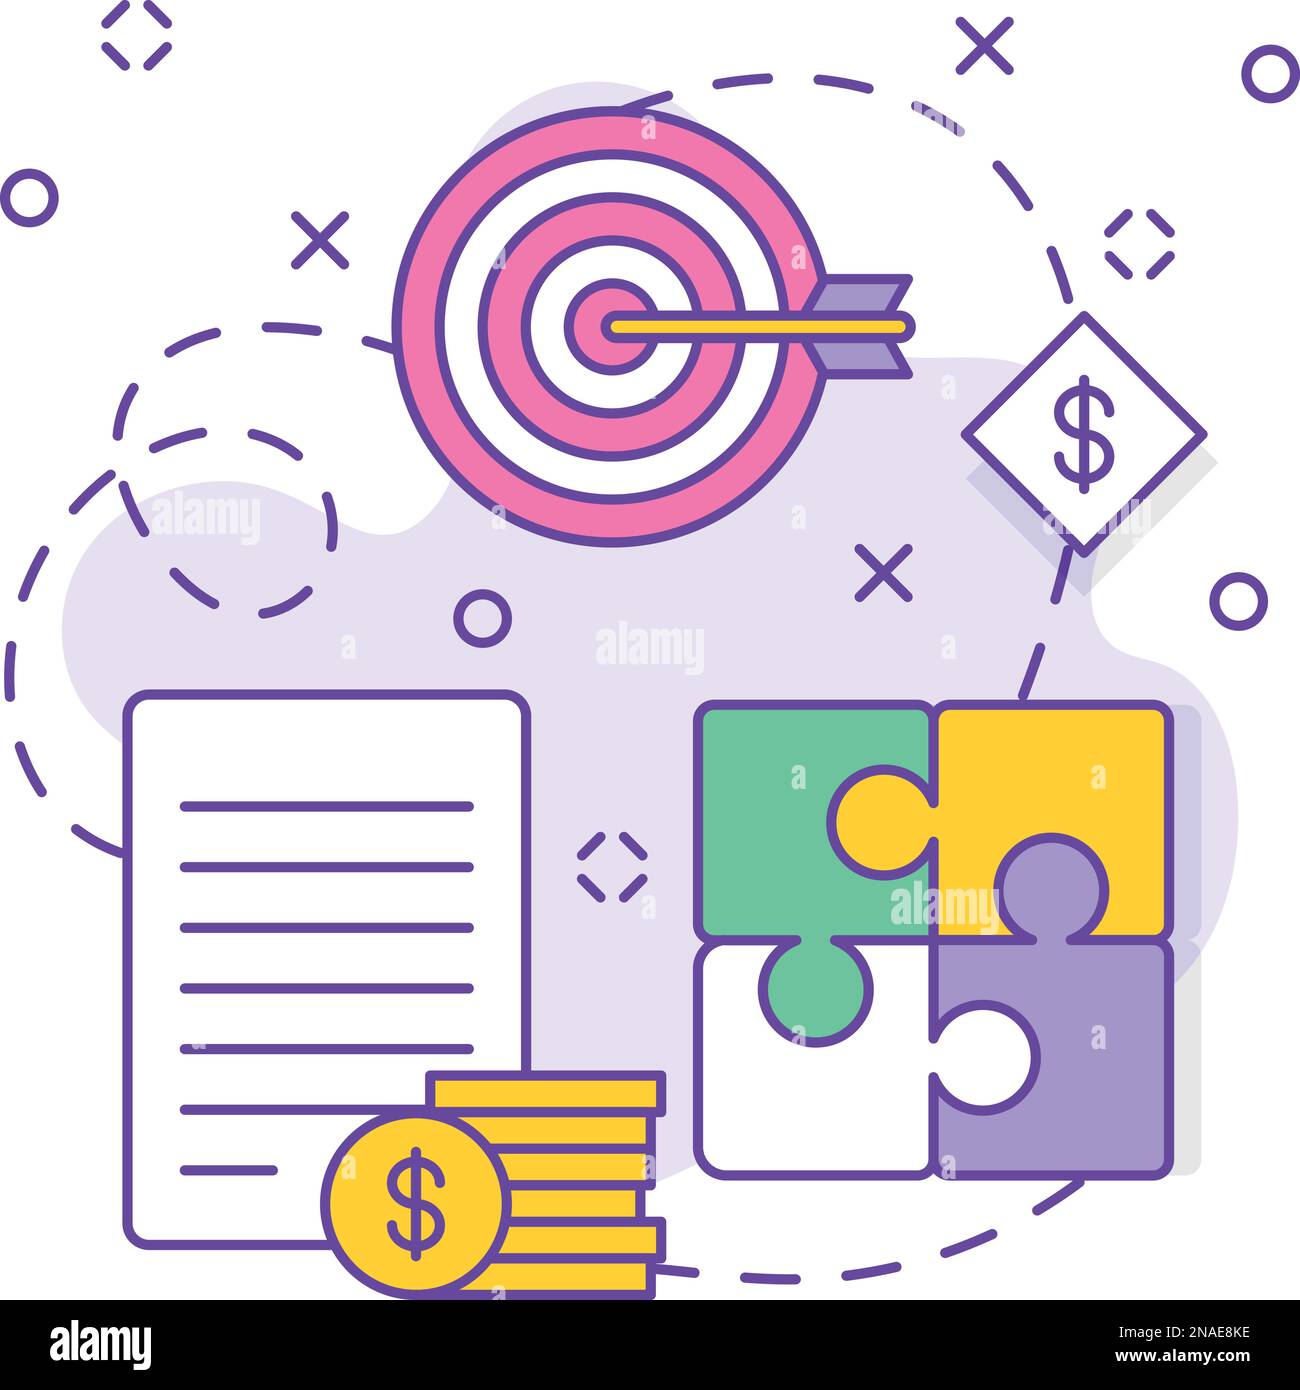 Create an estate plan vector design, business corporation Joint partnerships Sales and Marketing management monetary targets you strive to hit Concept Stock Vector